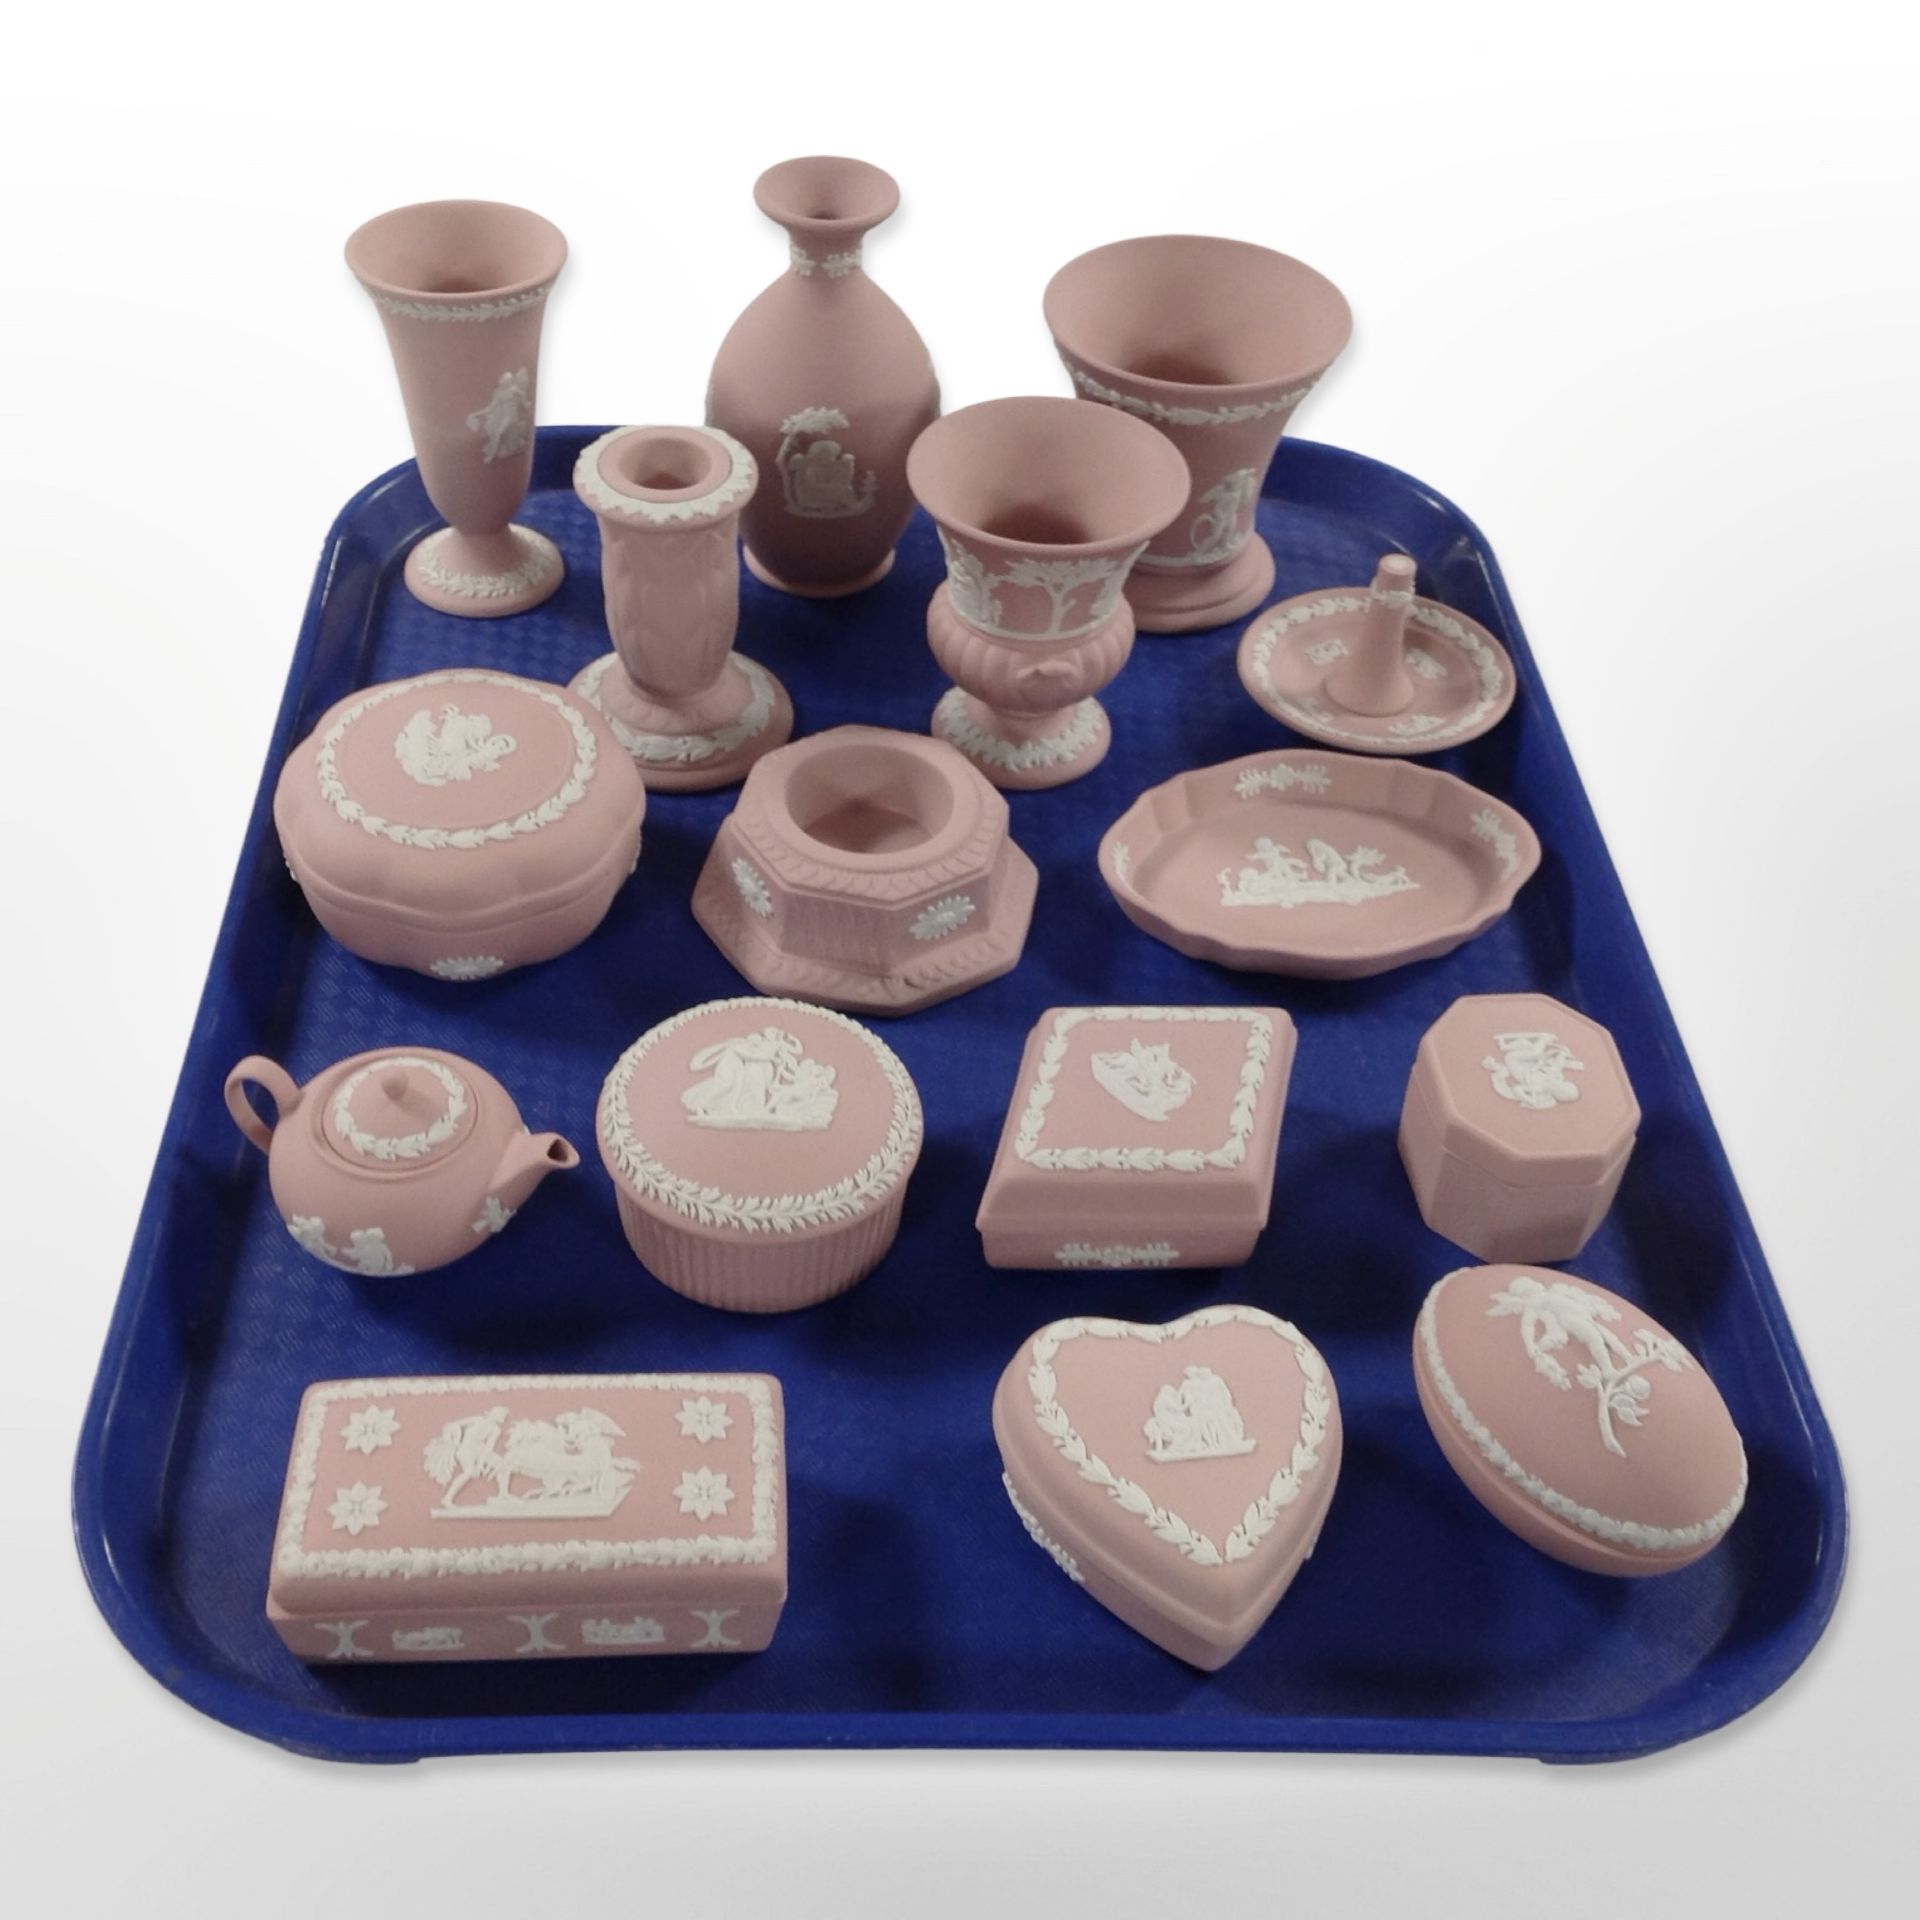 A collection of Wedgwood pink Jasperware cabinet china.